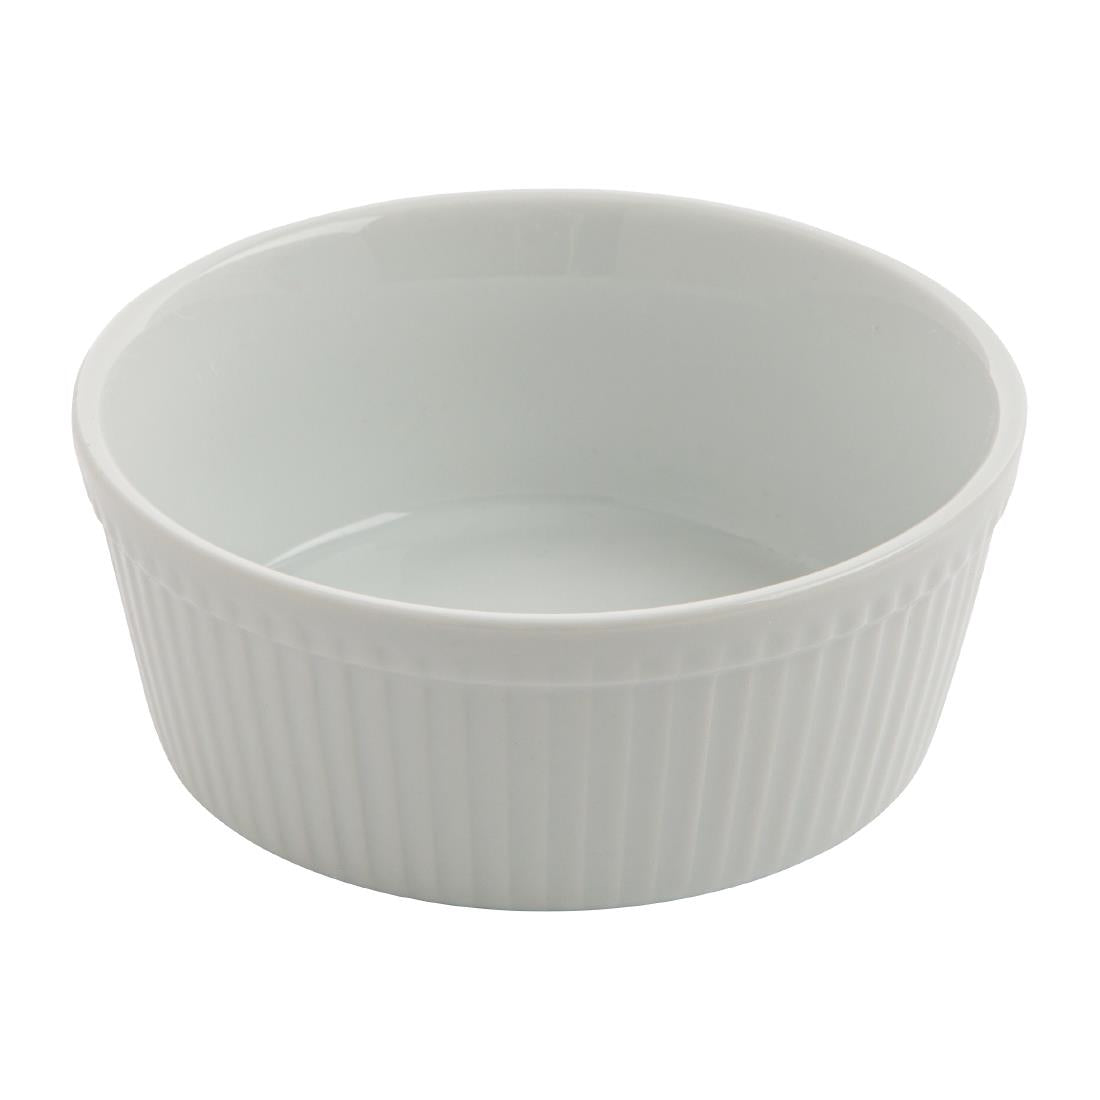 C042 Olympia Whiteware Round Pie Dishes 134mm (Pack of 6)